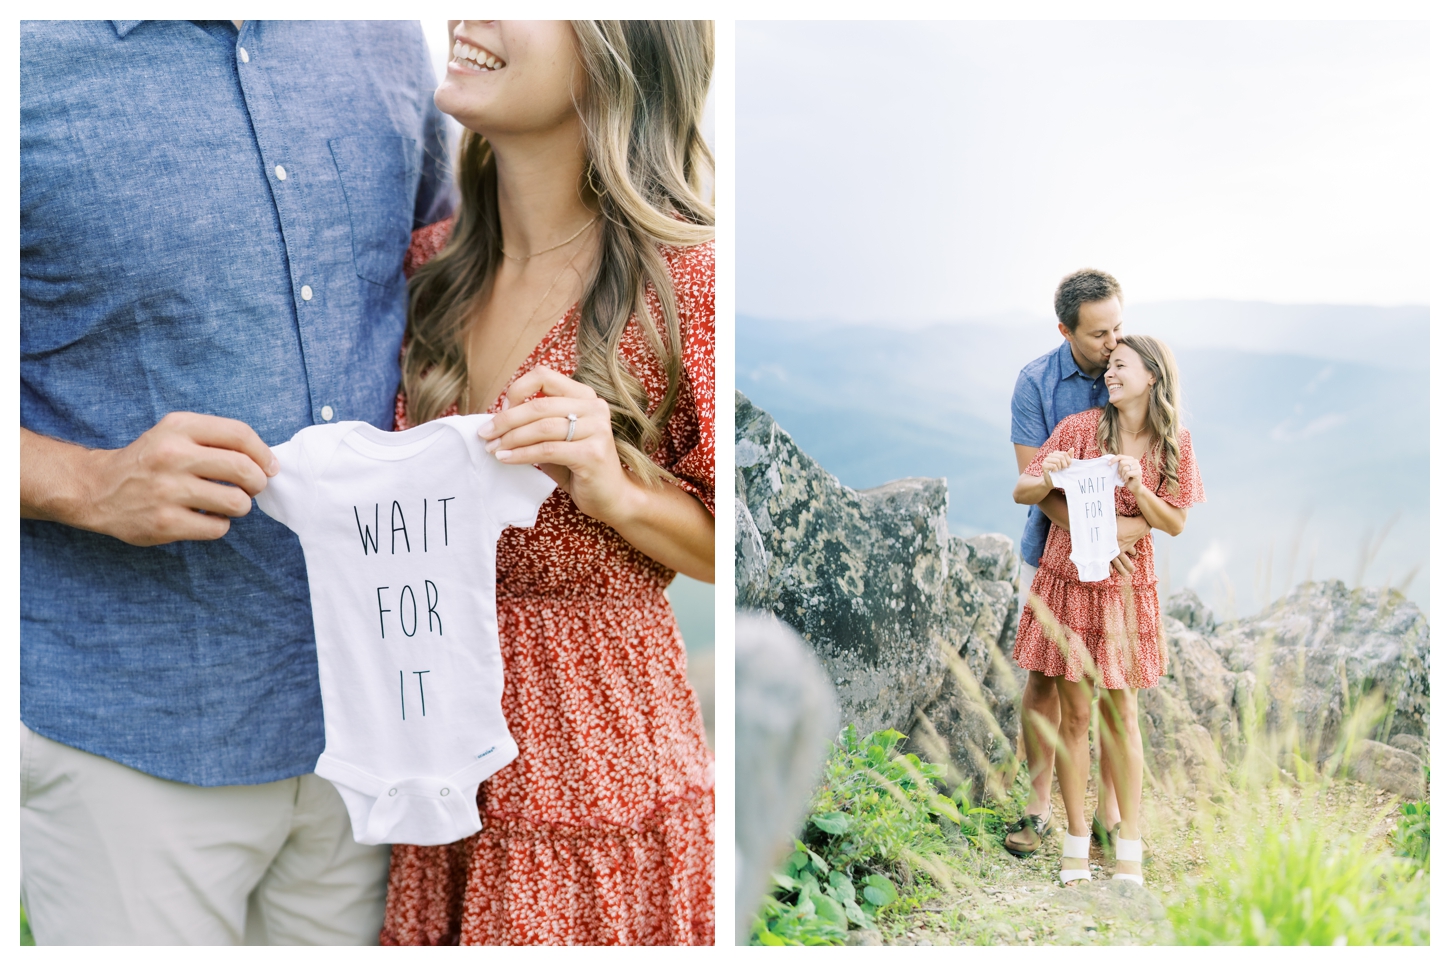 Ravens Roost baby announcement